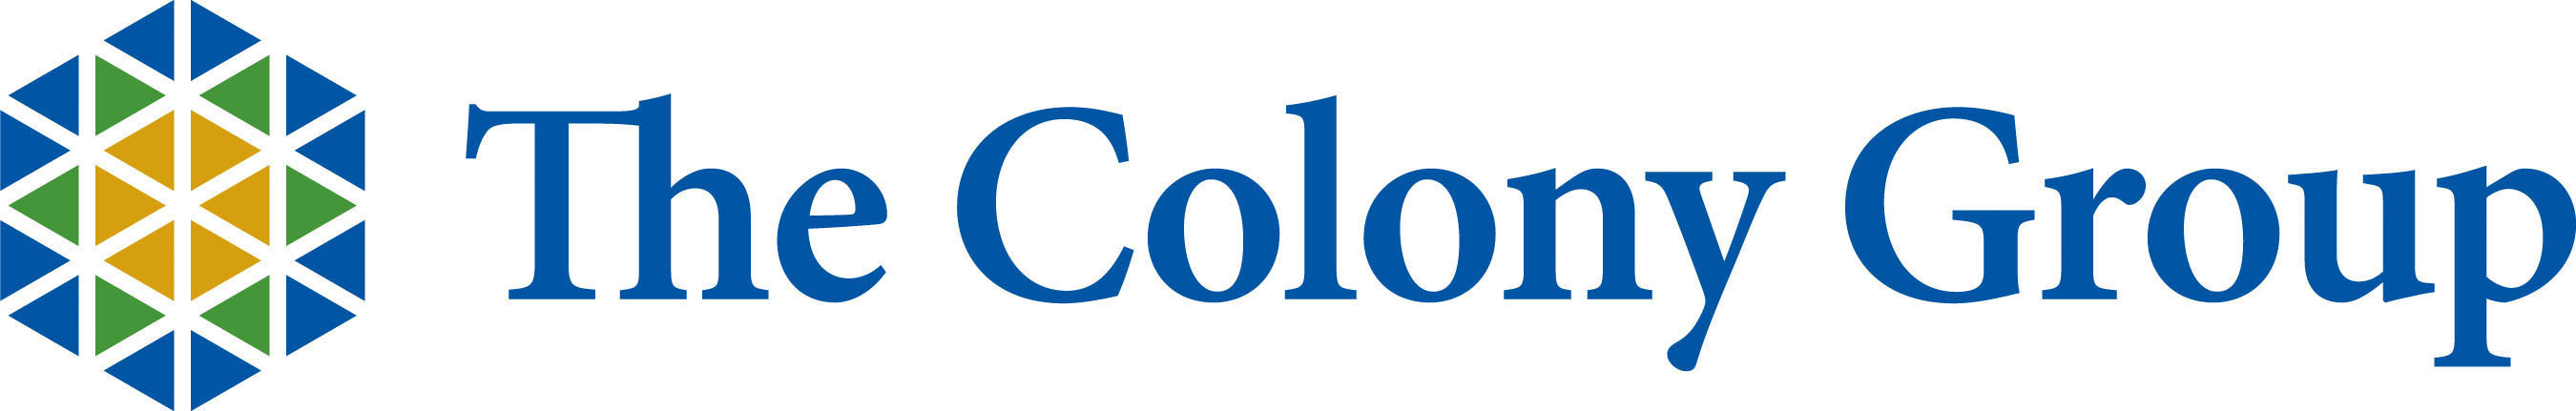 The Colony Group logo